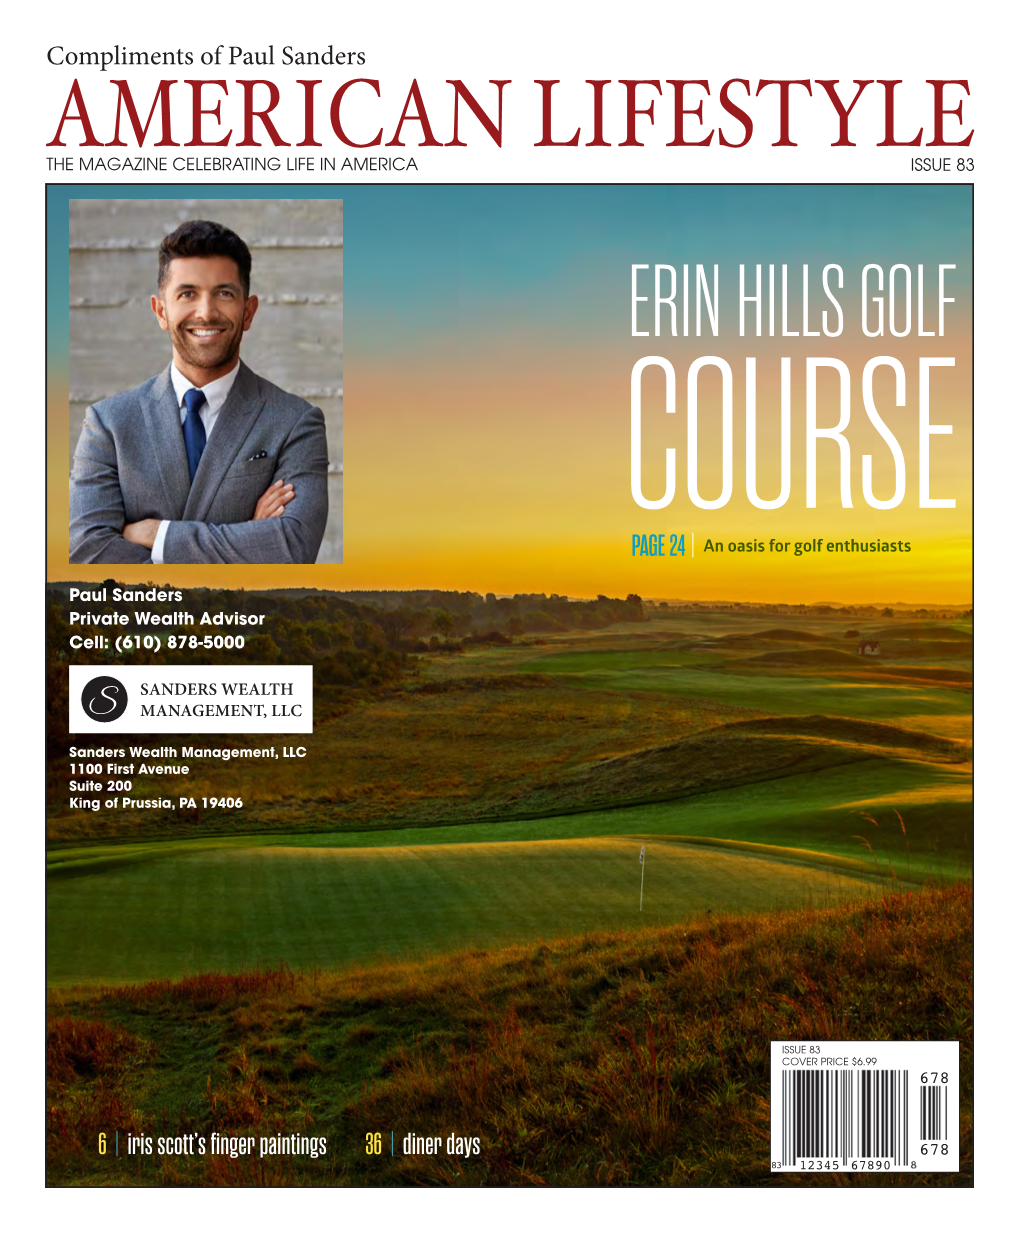 ERIN HILLS GOLF COURSE PAGE 24 an Oasis for Golf Enthusiasts